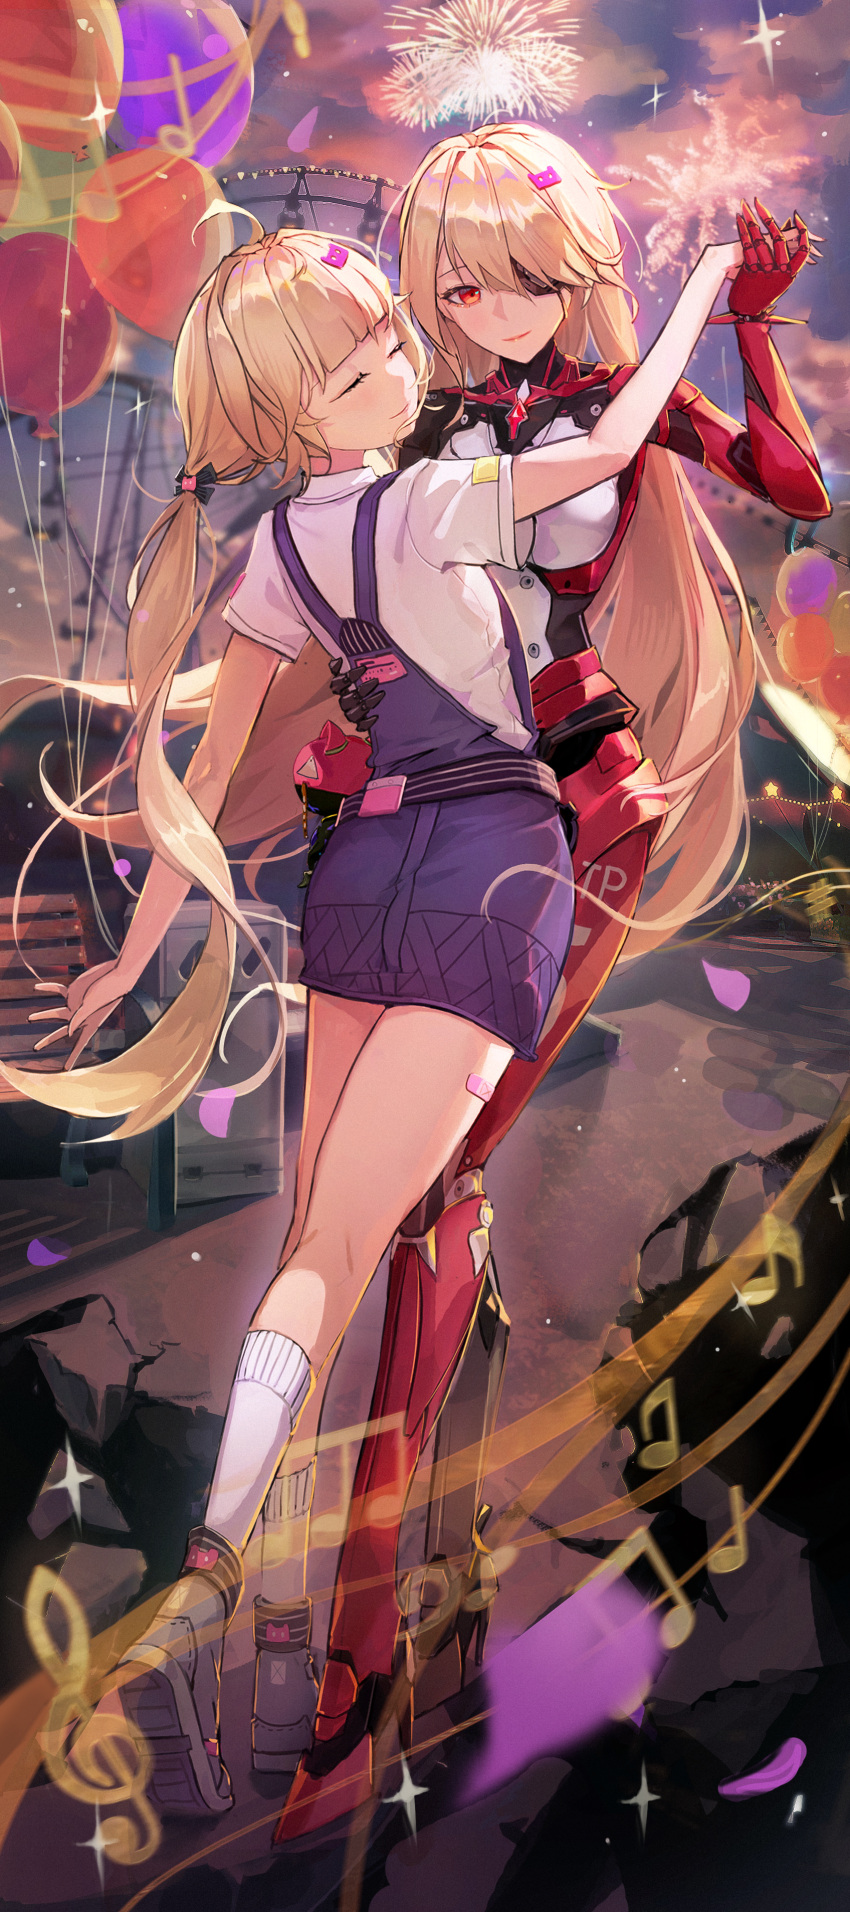 2girls absurdres blonde_hair blue_sky closed_eyes closed_mouth clouds cloudy_sky dancing eyepatch facing_to_the_side fireworks full_body highres holding_hands looking_at_viewer multiple_girls nemesis_(tower_of_fantasy) overalls red_eyes shirli_(tower_of_fantasy) sky smile socks tower_of_fantasy twintails xude yuri